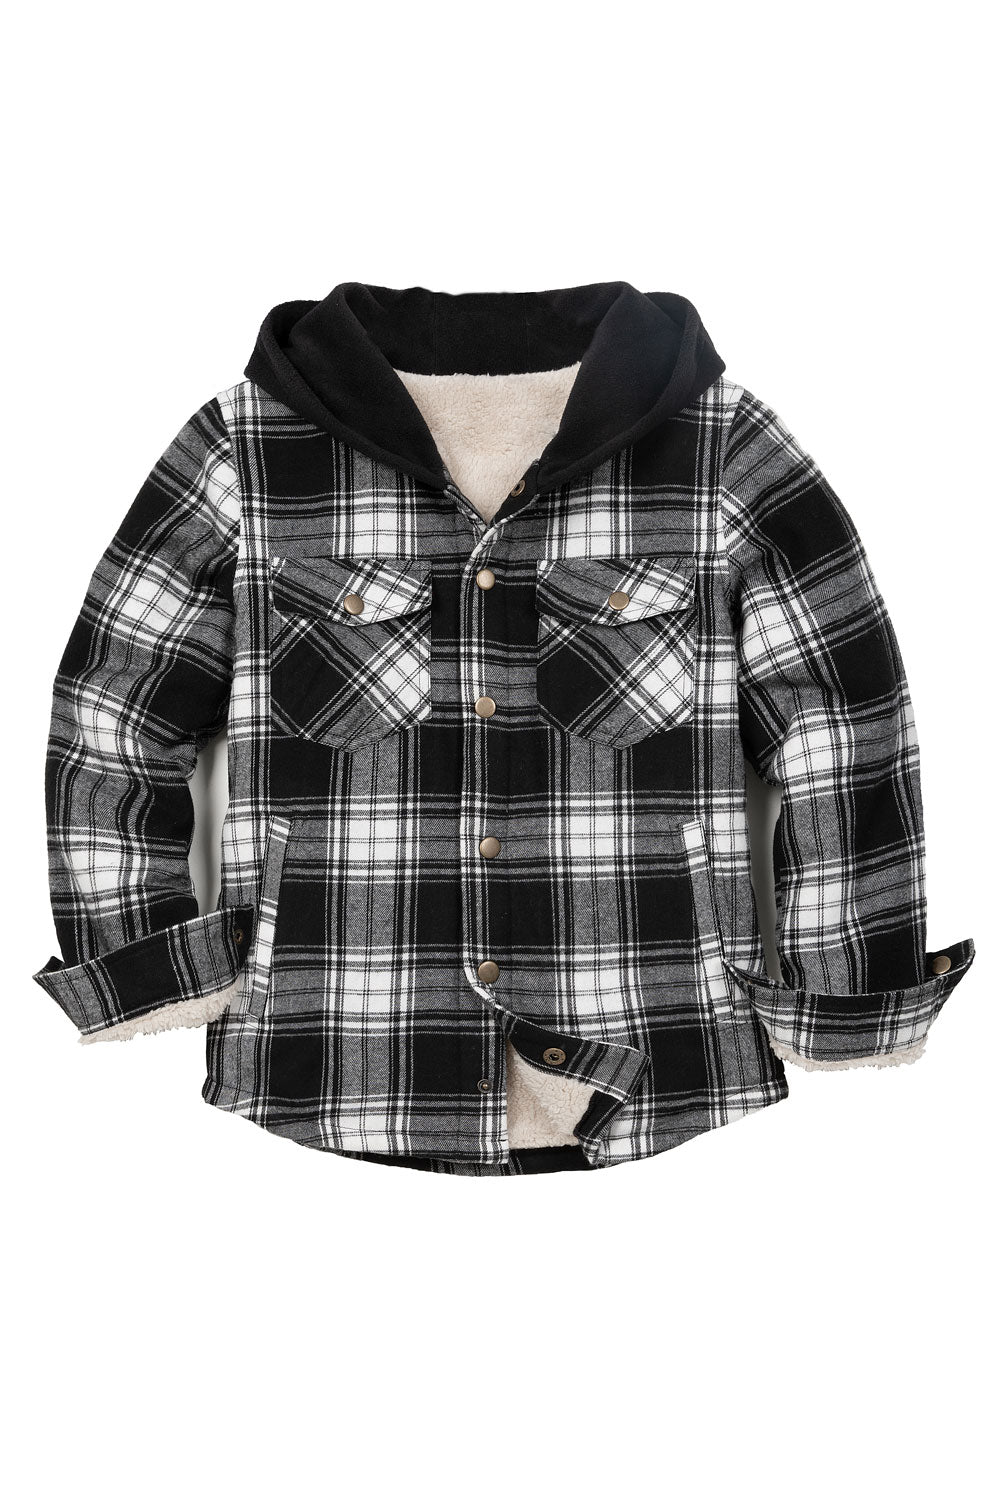 Kids Boys and Girls Fleece-Lined Snap Flannel Shirt,Hooded Plaid Jacket